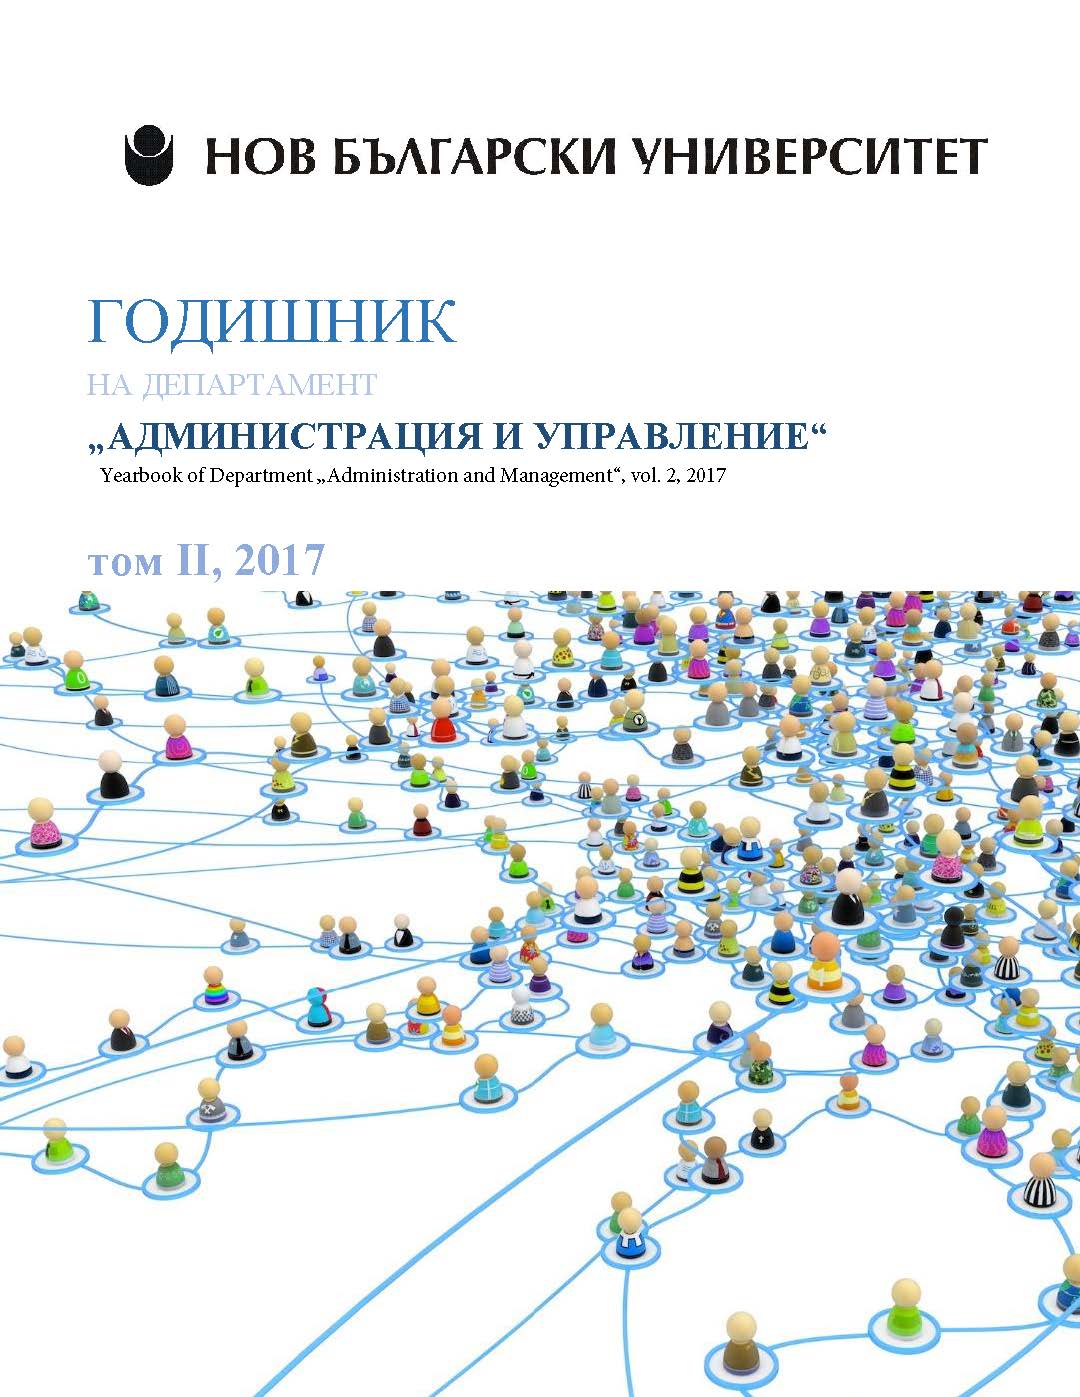 The Administrative Reform in the Ministry of Interior and the Ombudsman's Challenge of Constitutionality of Legal
Provisions Cover Image